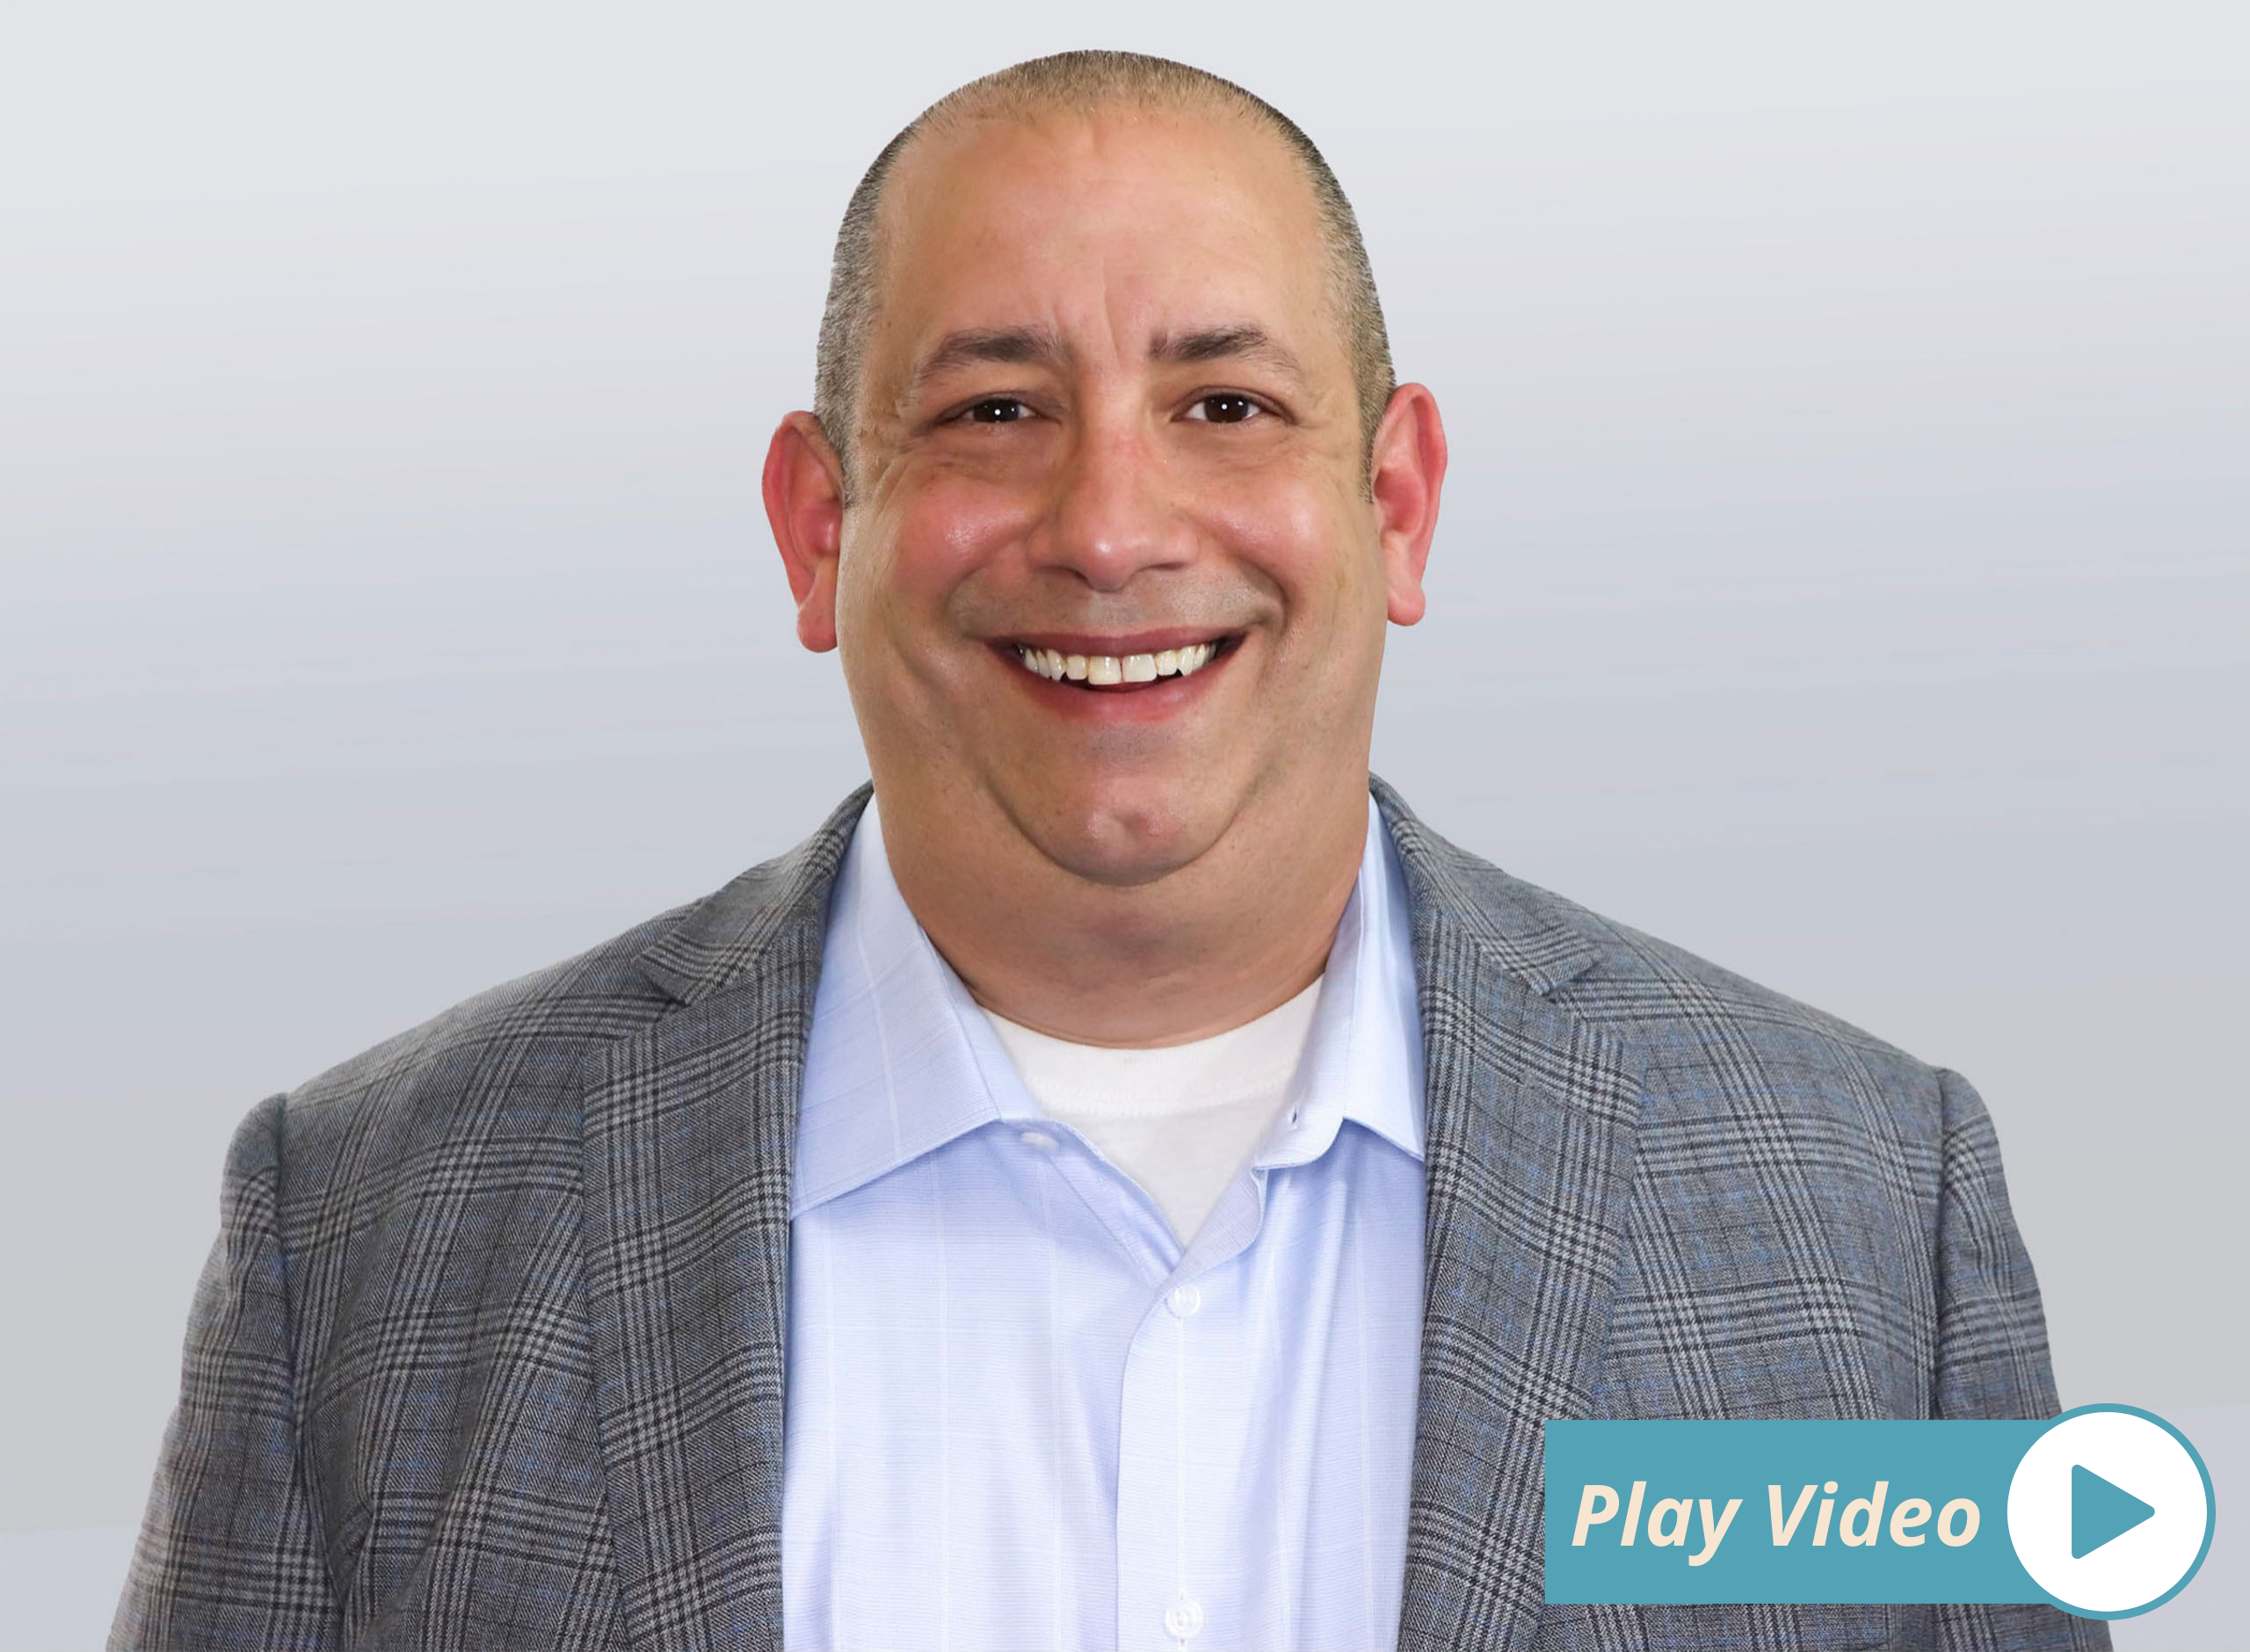 Pete Carrucciu, CRIS, Senior Vice President, Real Estate & Construction Practice. Click to play a video introduction.